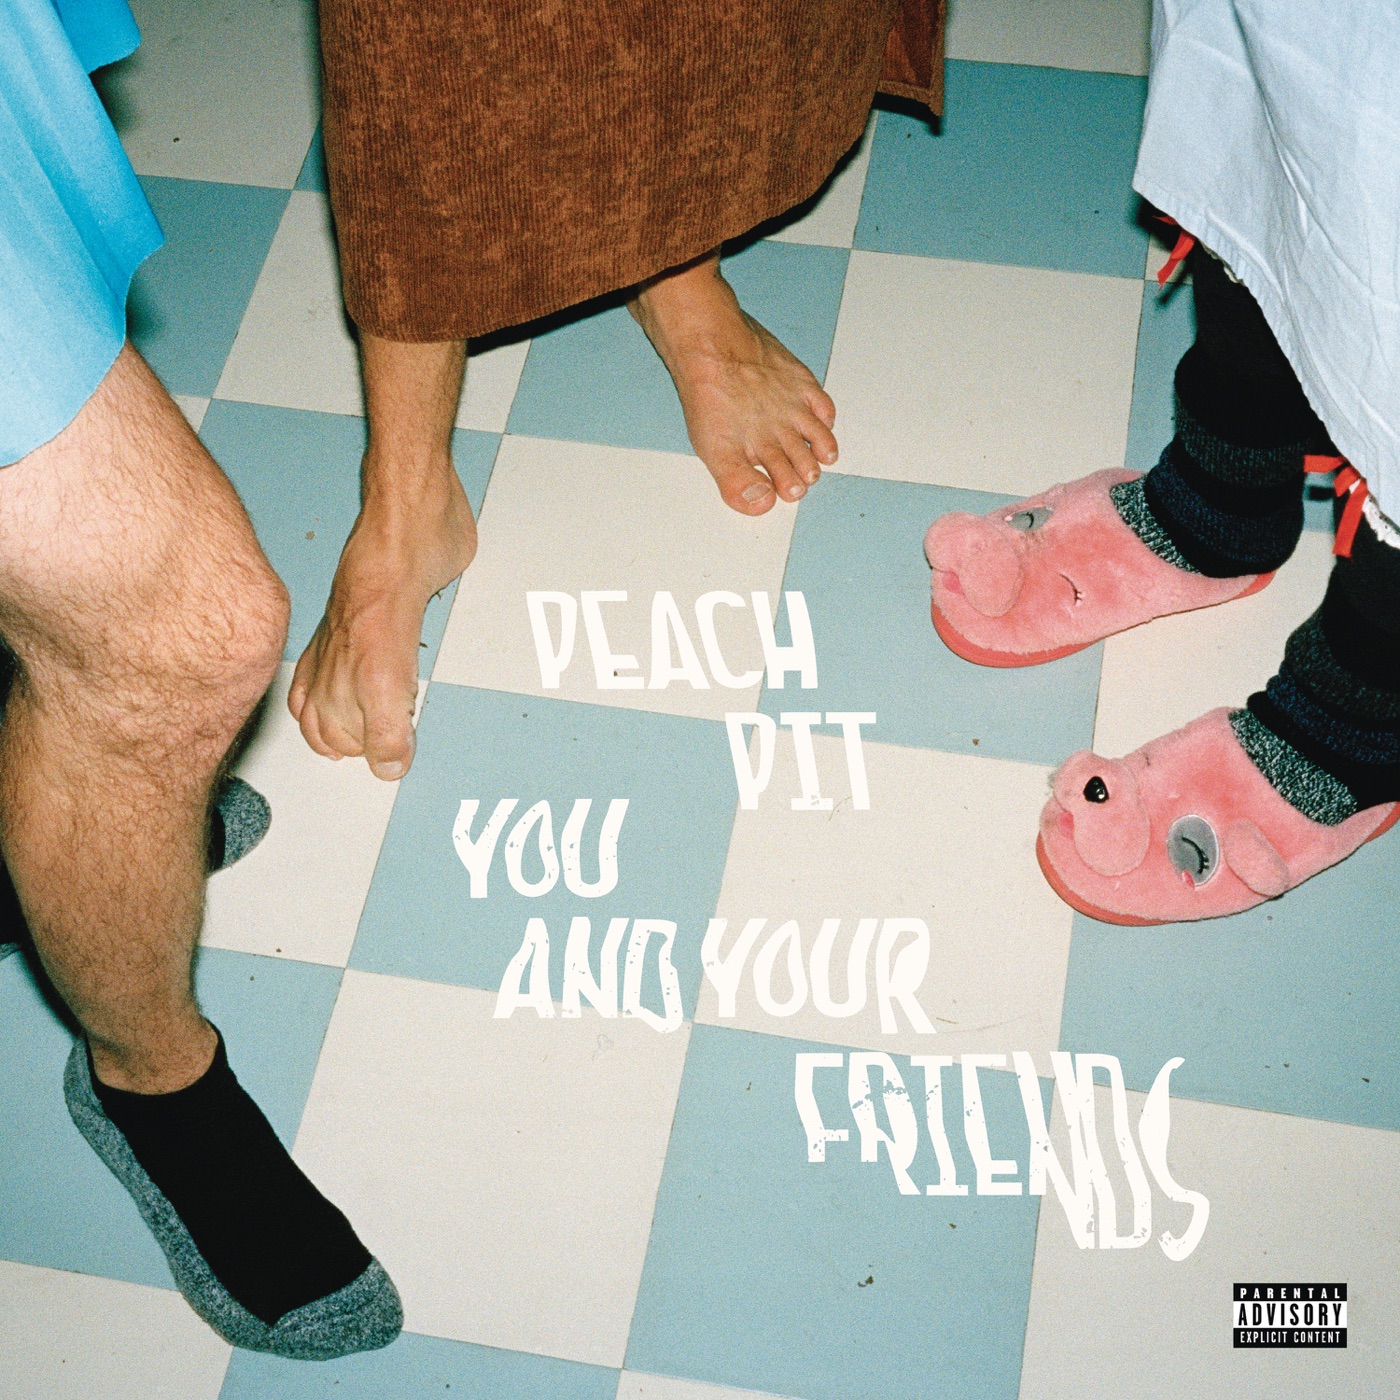 You and Your Friends by Peach Pit